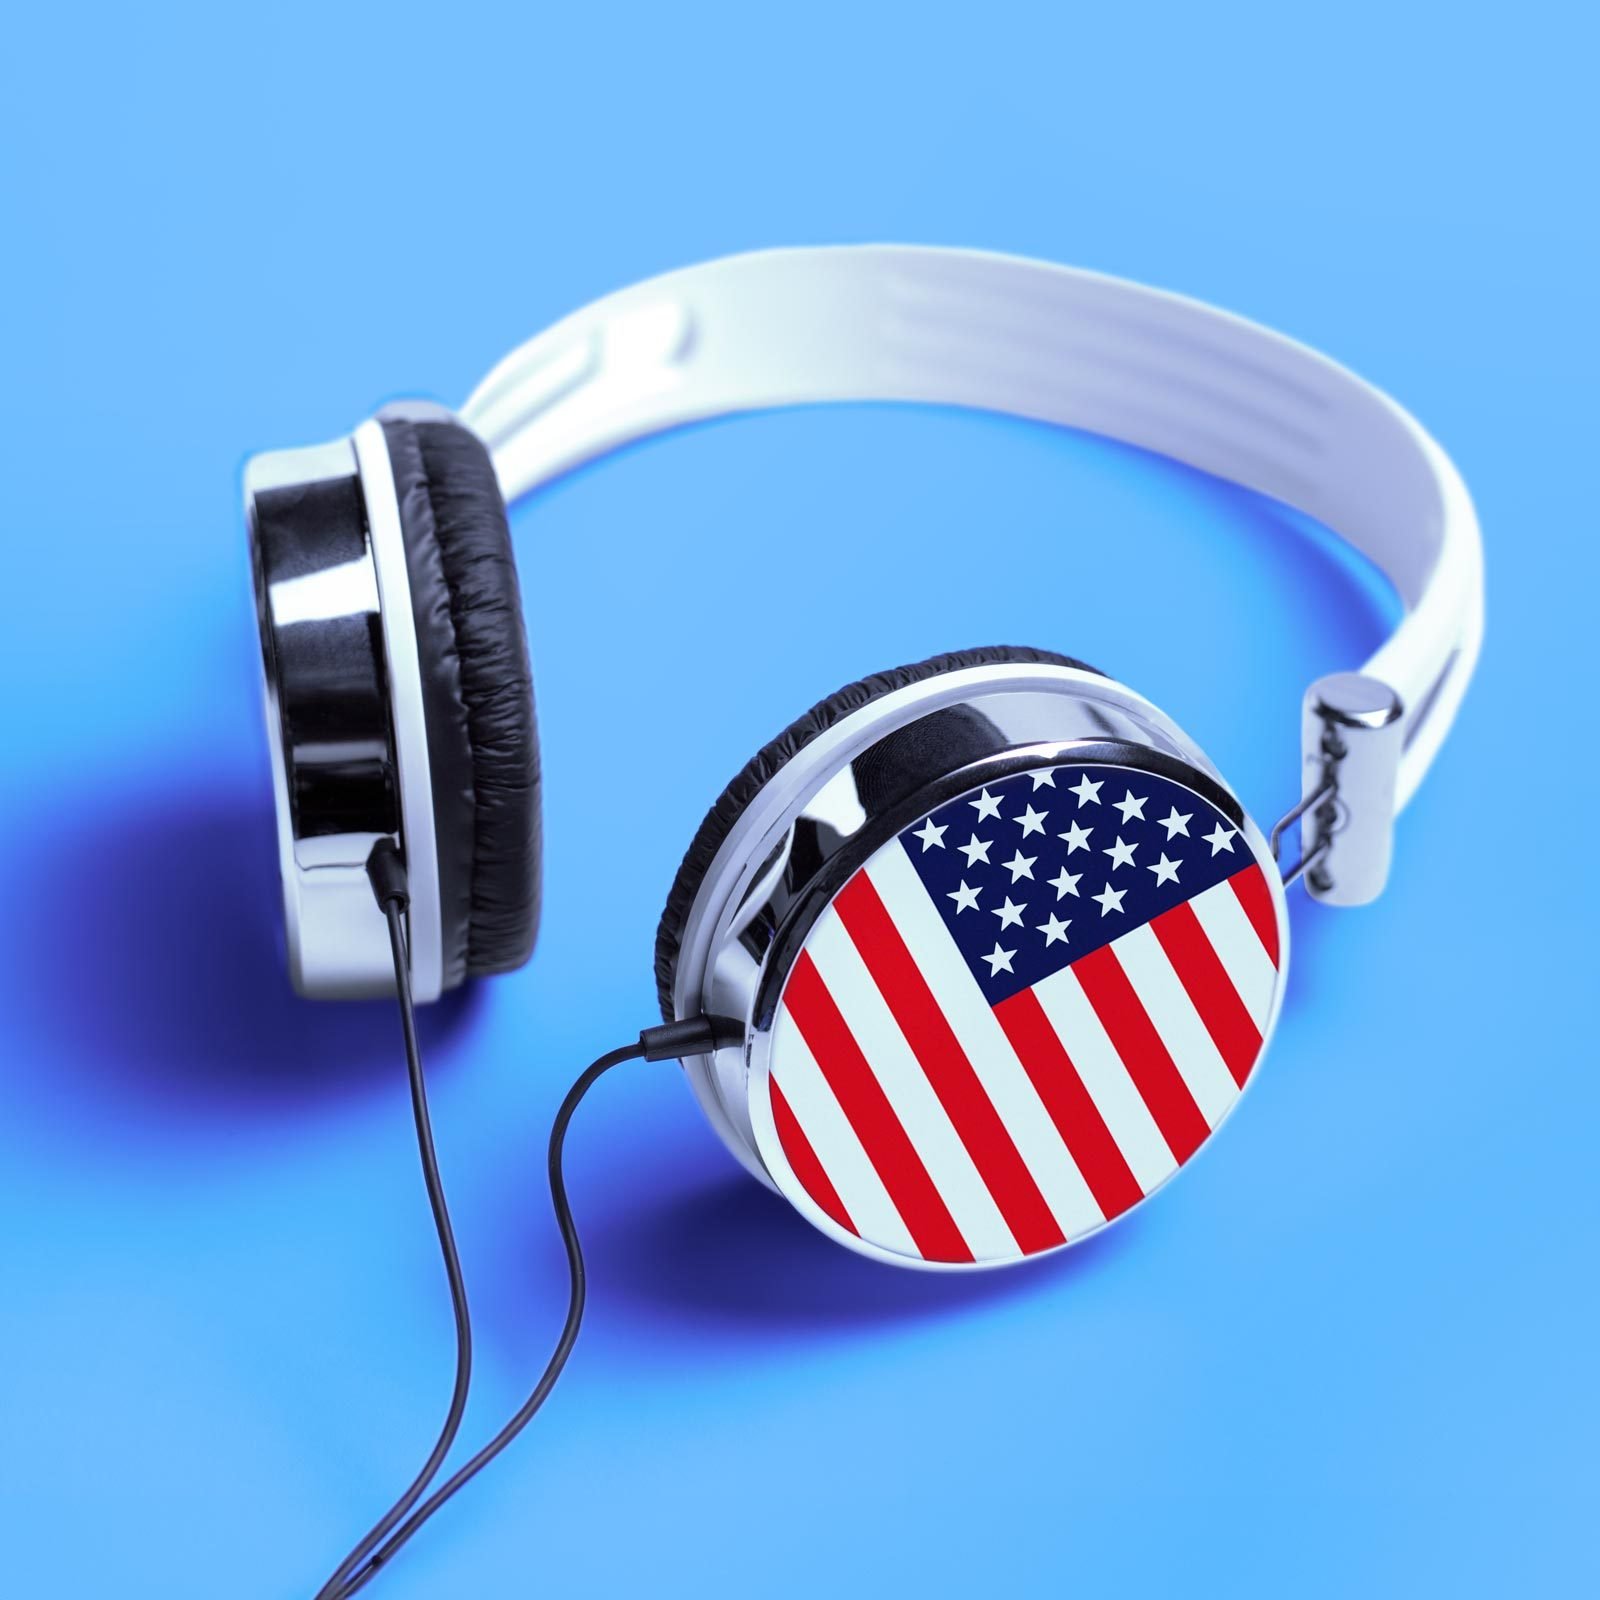 headphones with american flag on the side